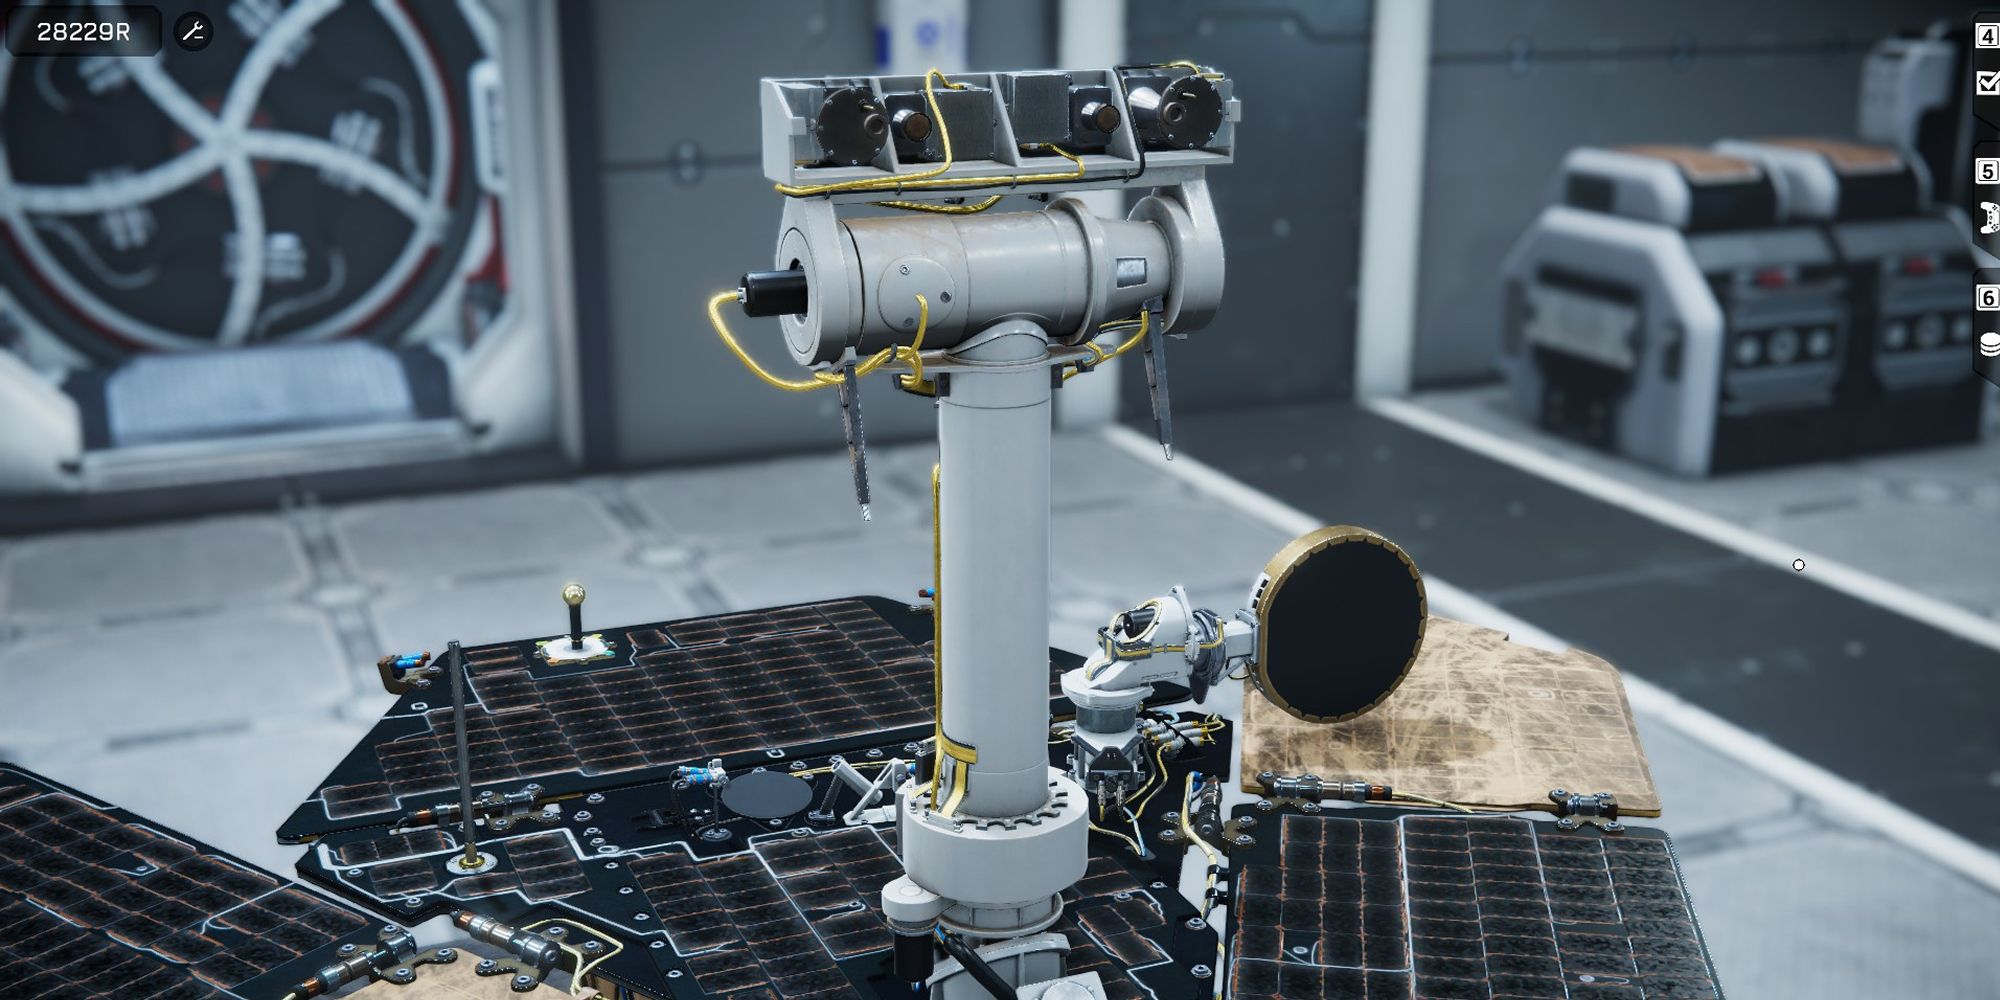 Close up of a Mars Rover in the game Rover Mechanic Simulator